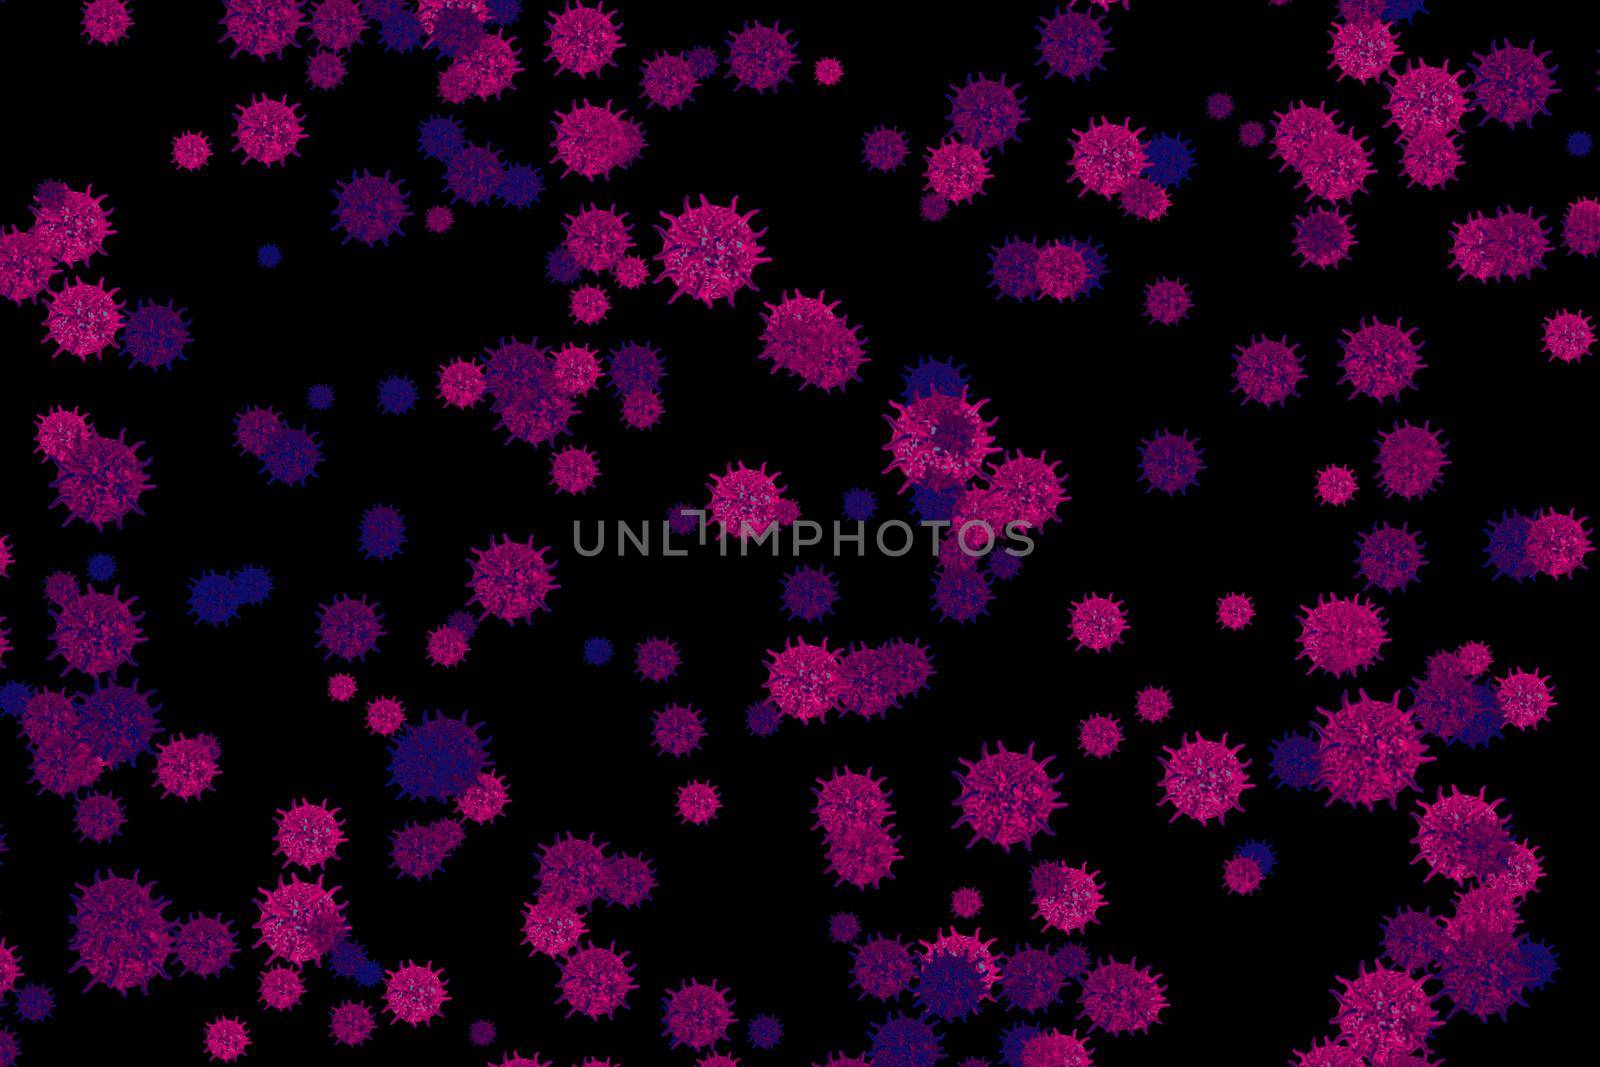 small virus covid 19 ball dark blue magenta was floating in air on black screen